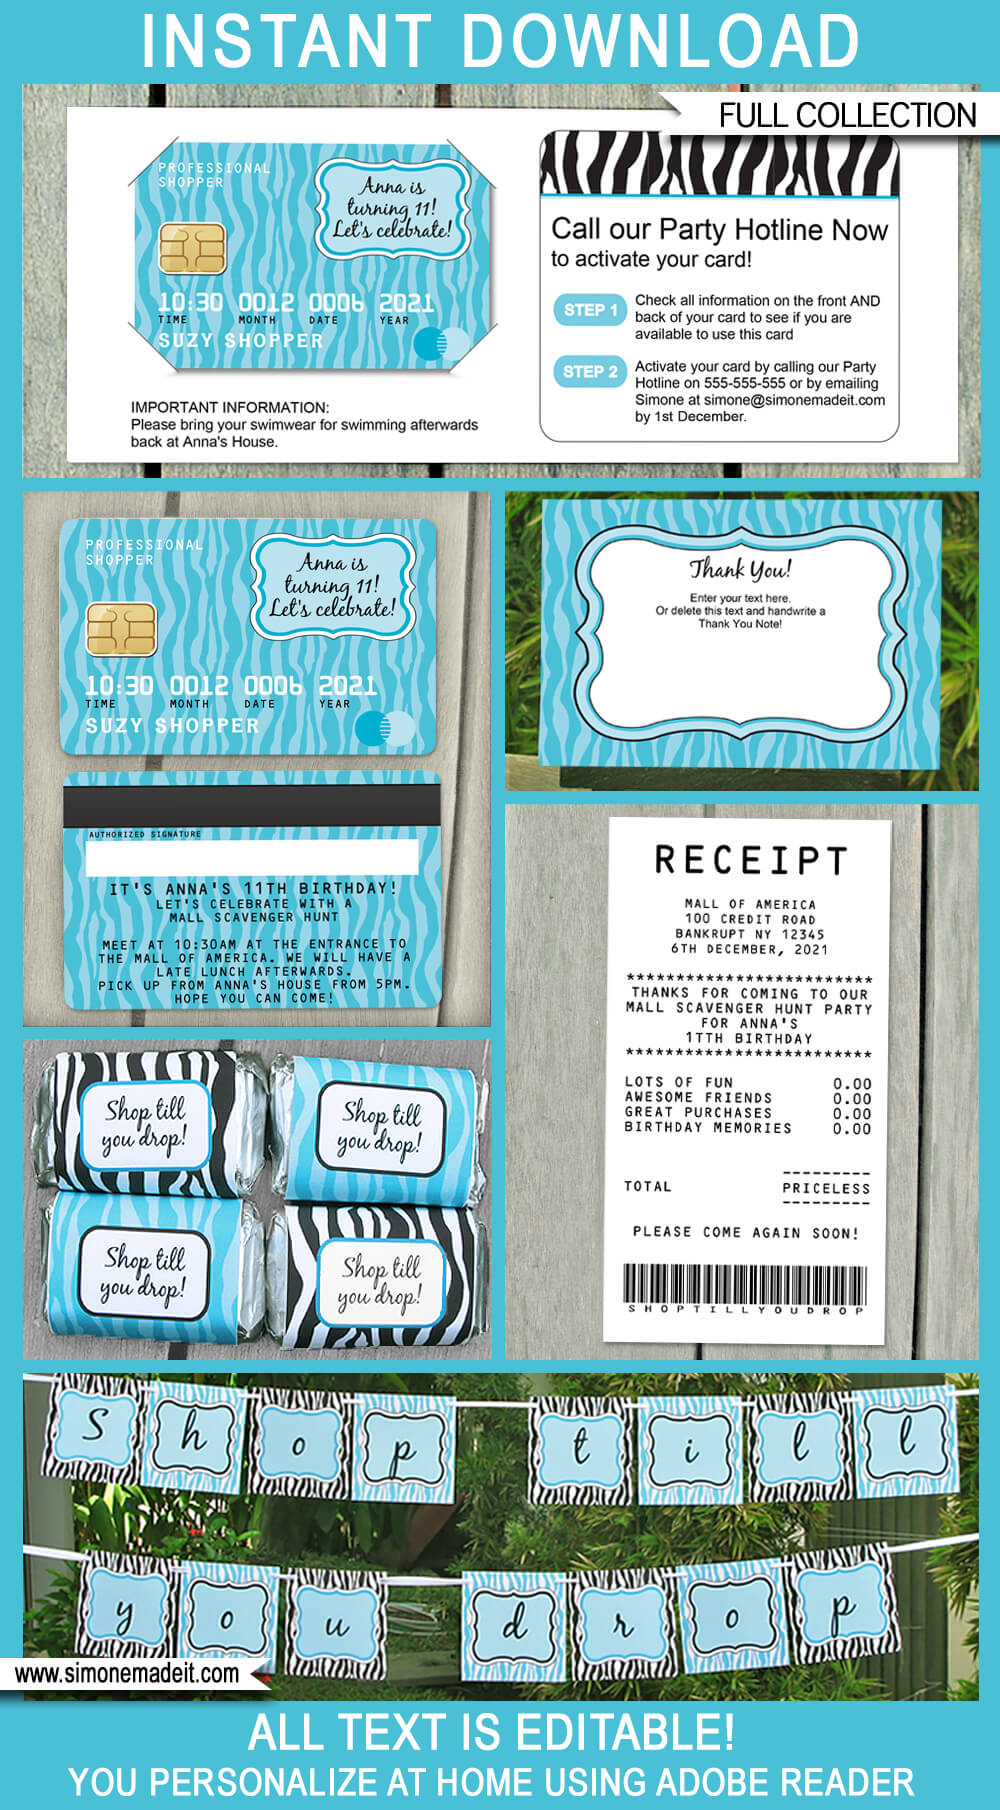 Mall Scavenger Hunt Party Printables, Invitations & Decorations | Shopping Party | Editable Birthday Party Theme Templates | INSTANT DOWNLOAD $12.50 via SIMONEmadeit.com